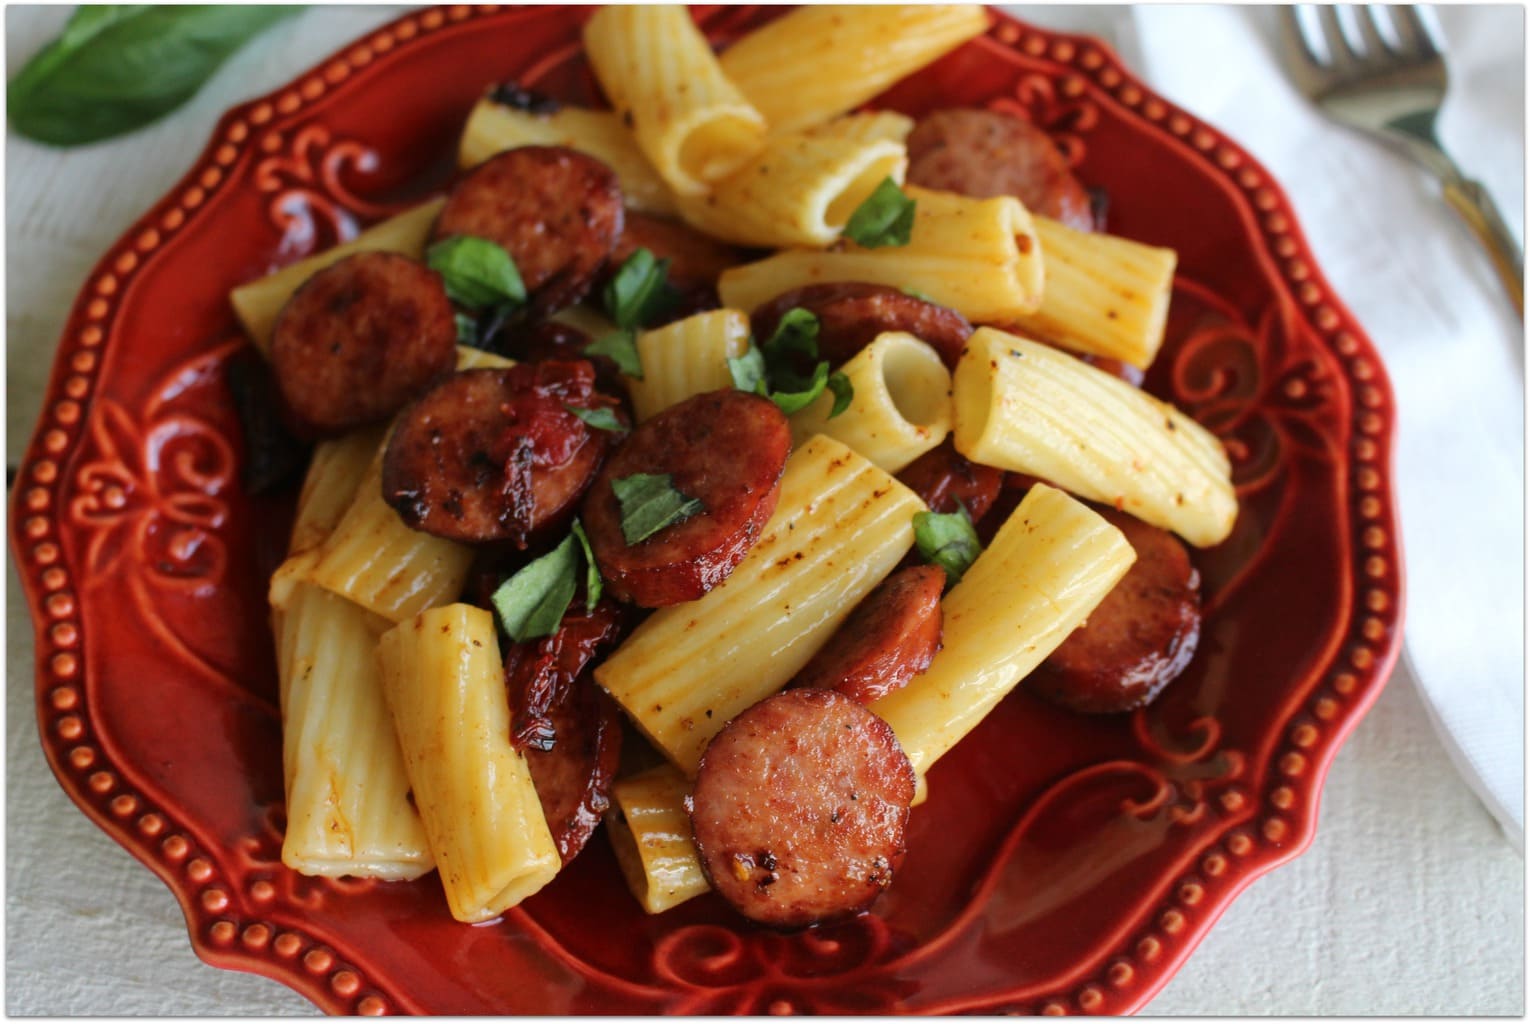 This Italian Rigatoni with smoked sausage and sundried tomato is one of the best dinner recipes I've ever made. The smokiness of the sausage paired with the sweetness of the sundried tomatoes gives this easy recipe amazing flavor, and it won't keep you in the kitchen for hours! I like easy!